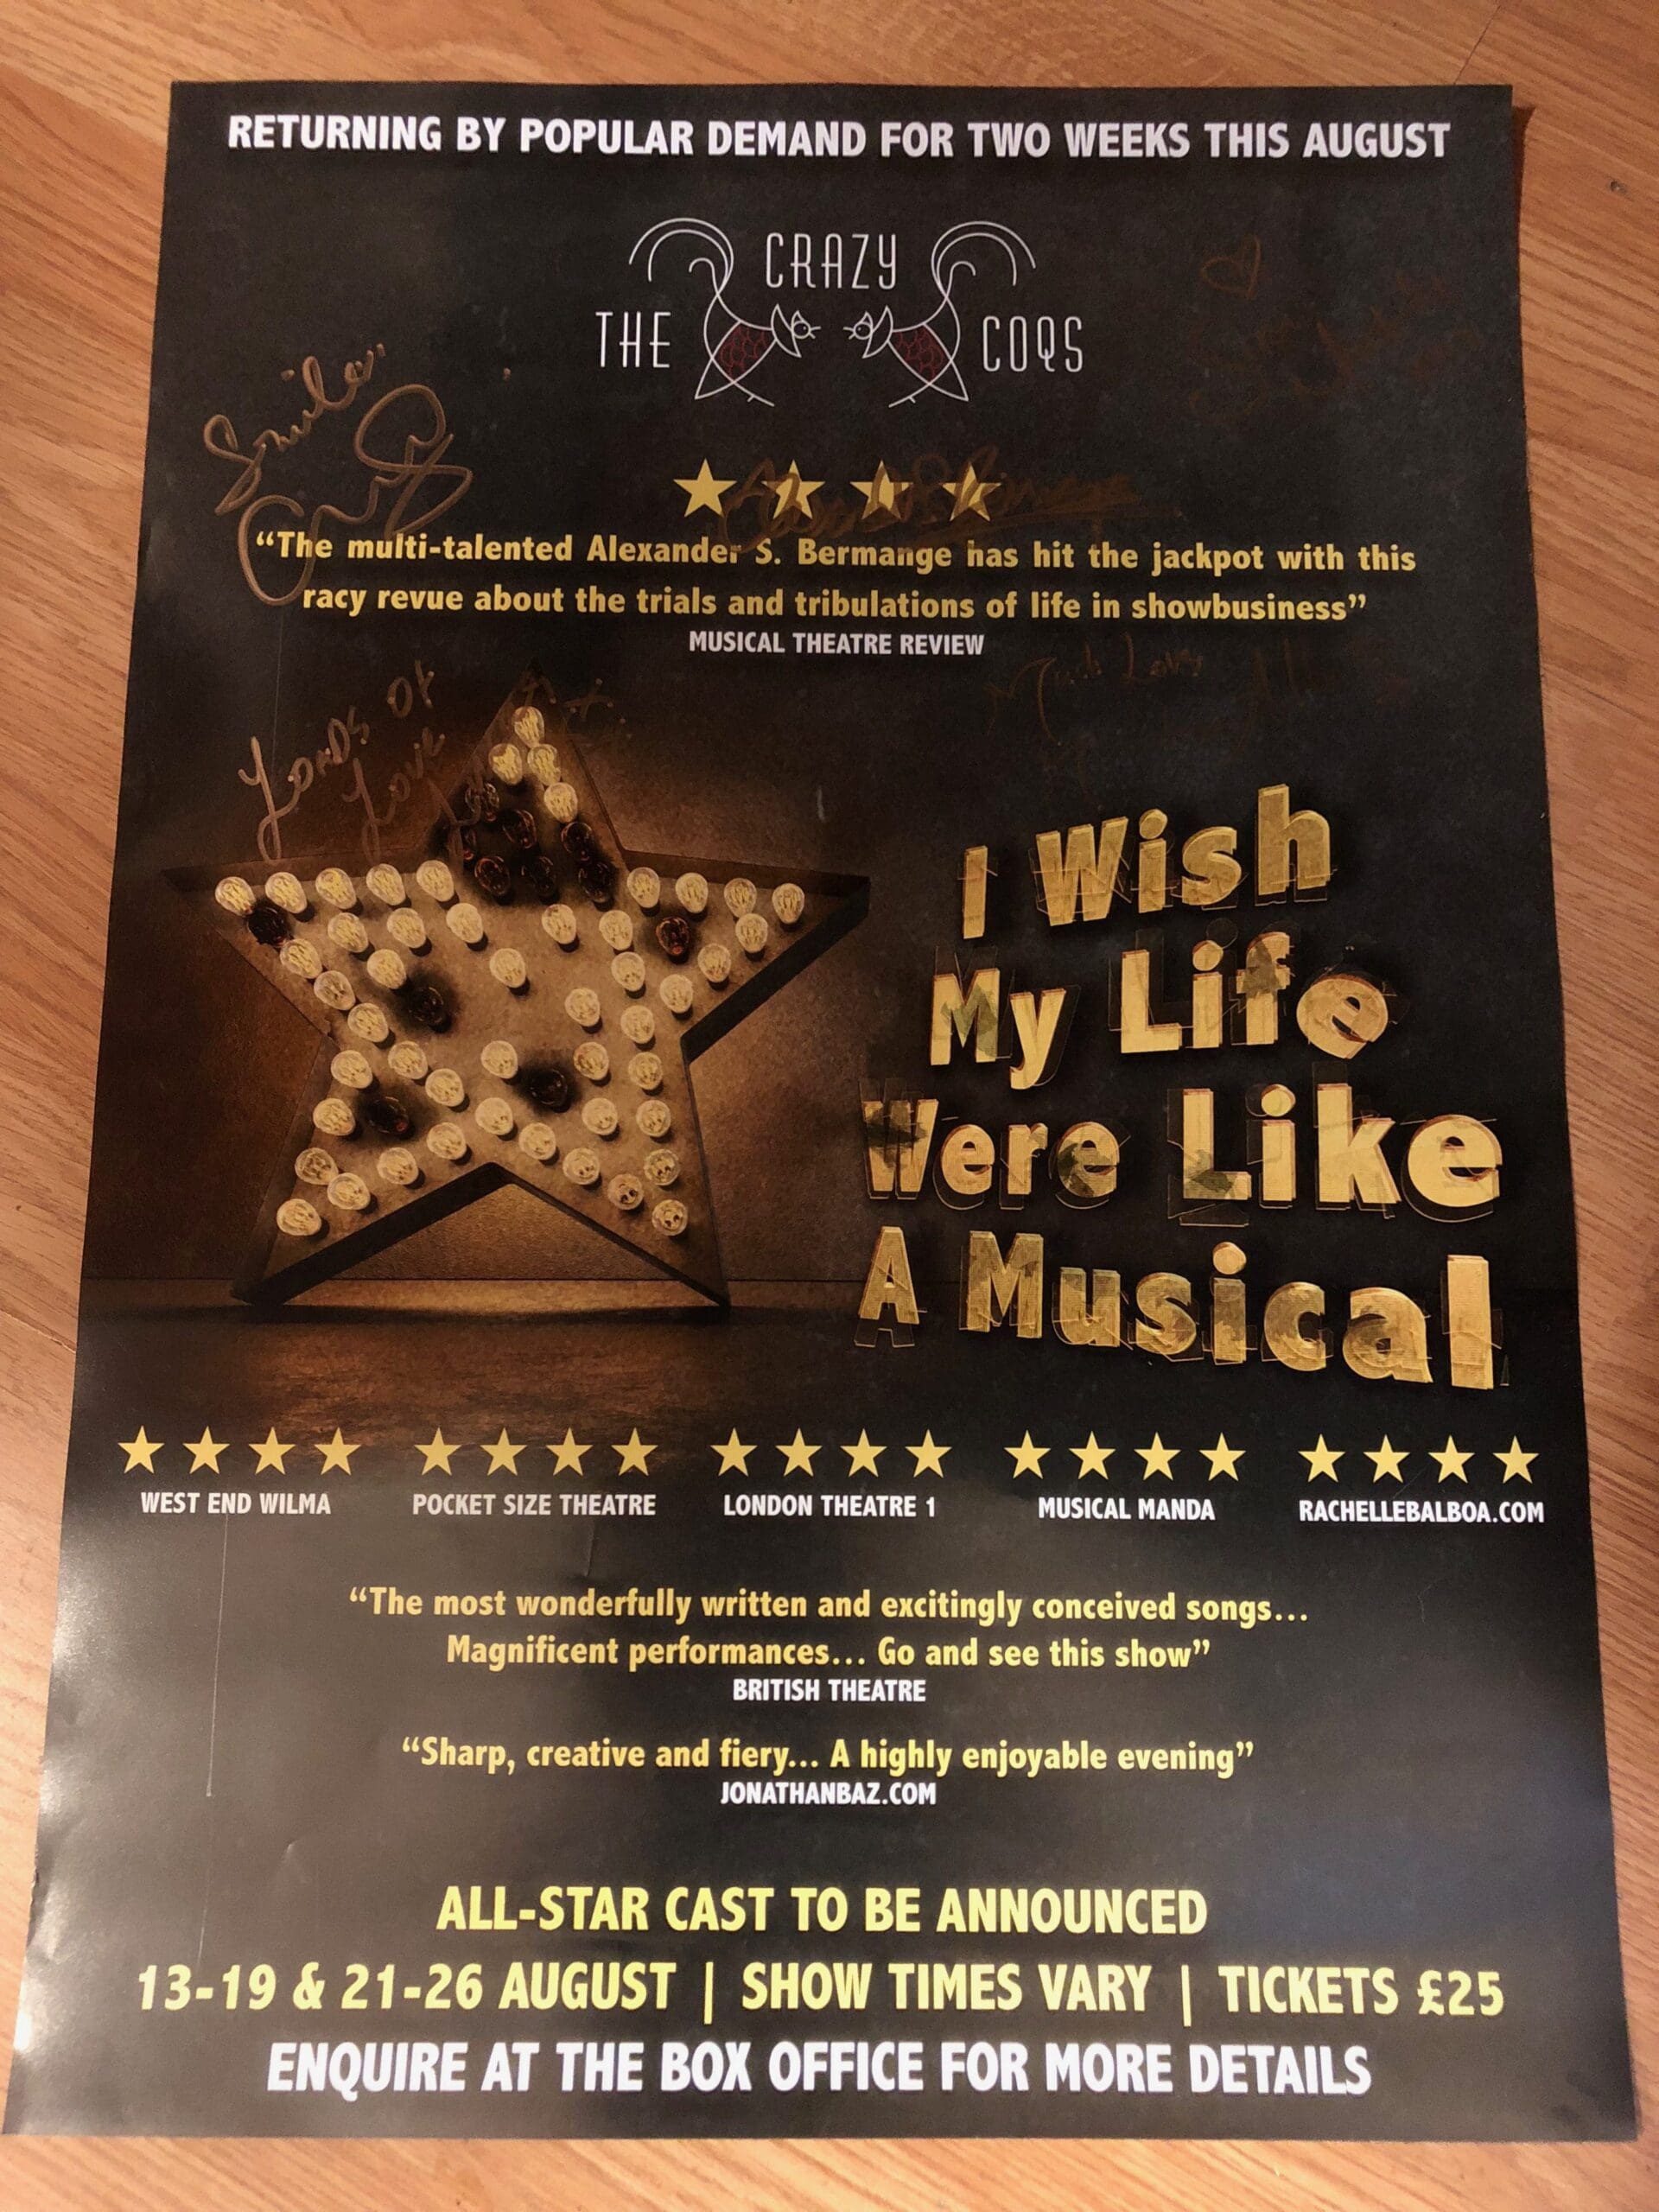 Featured image for “Enter our competition for a chance to win a poster signed by the cast of I Wish My Life Were Like A Musical”